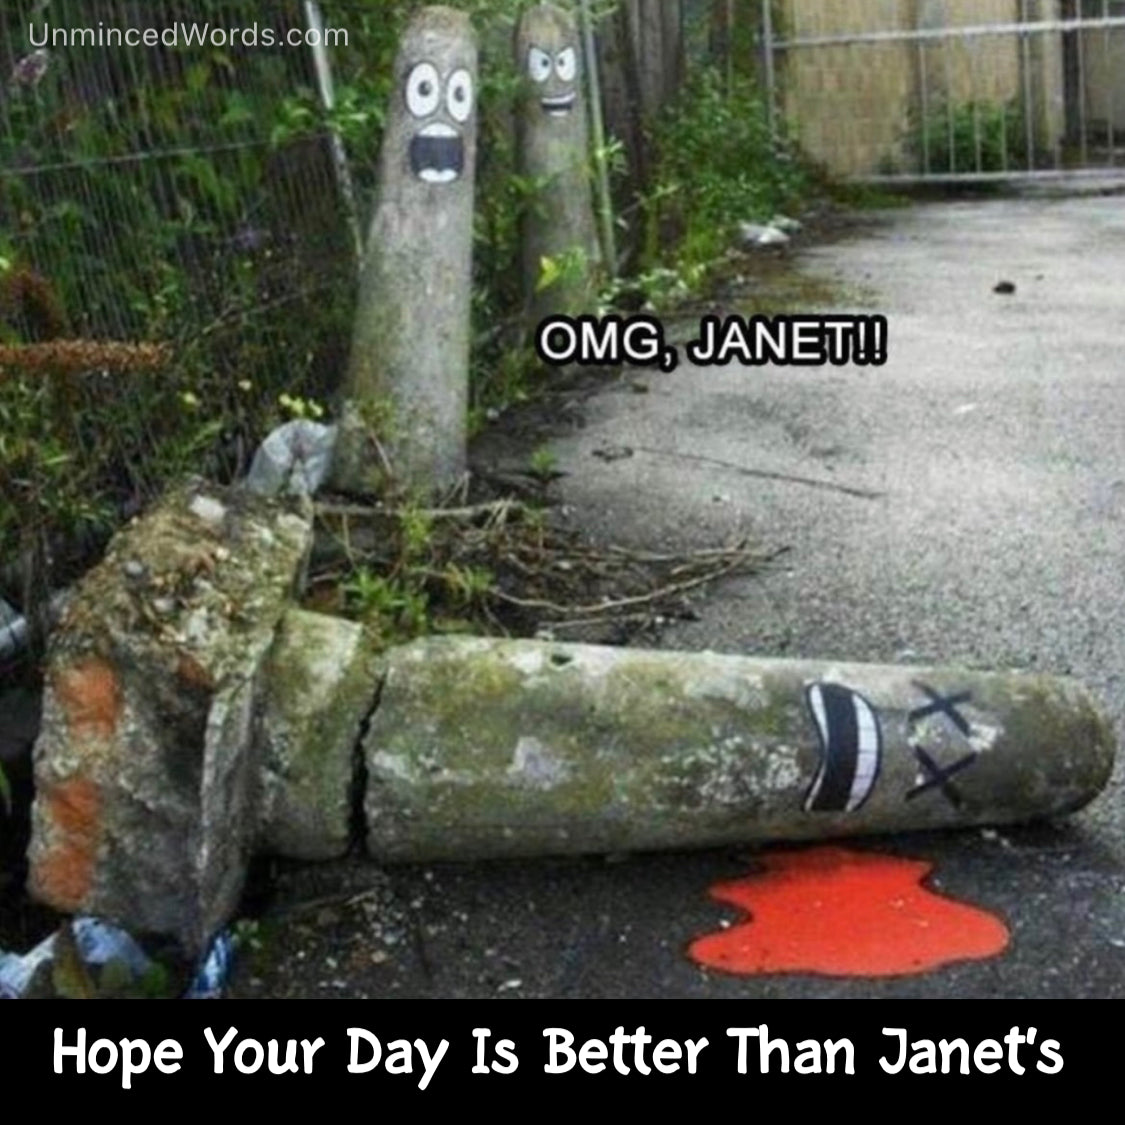 Hope your day is better than Janet’s.